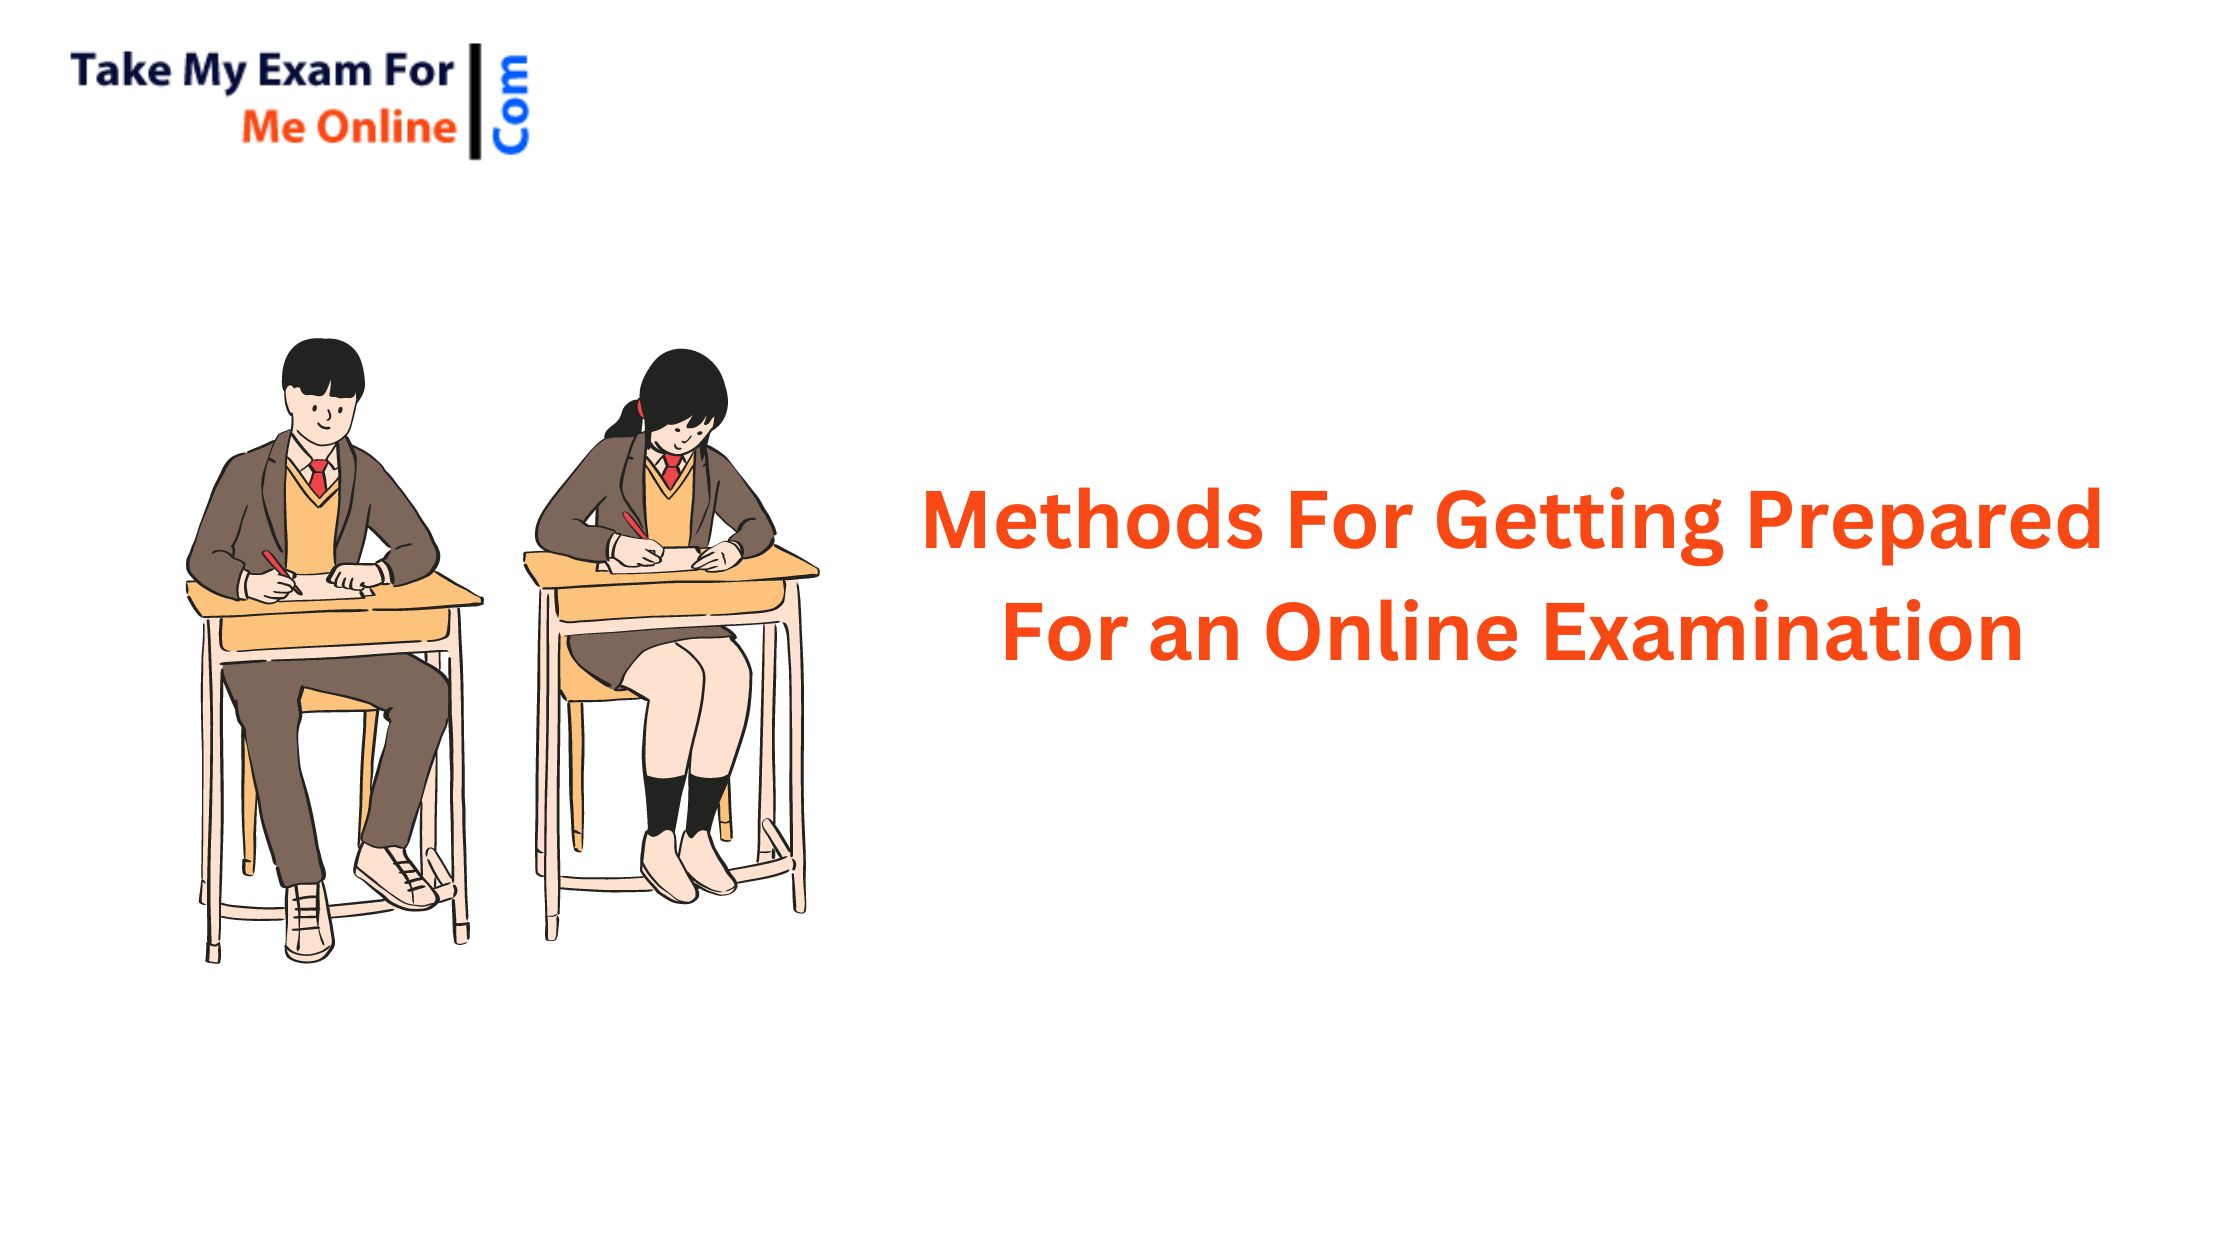 Methods For Getting Prepared For an Online Examination